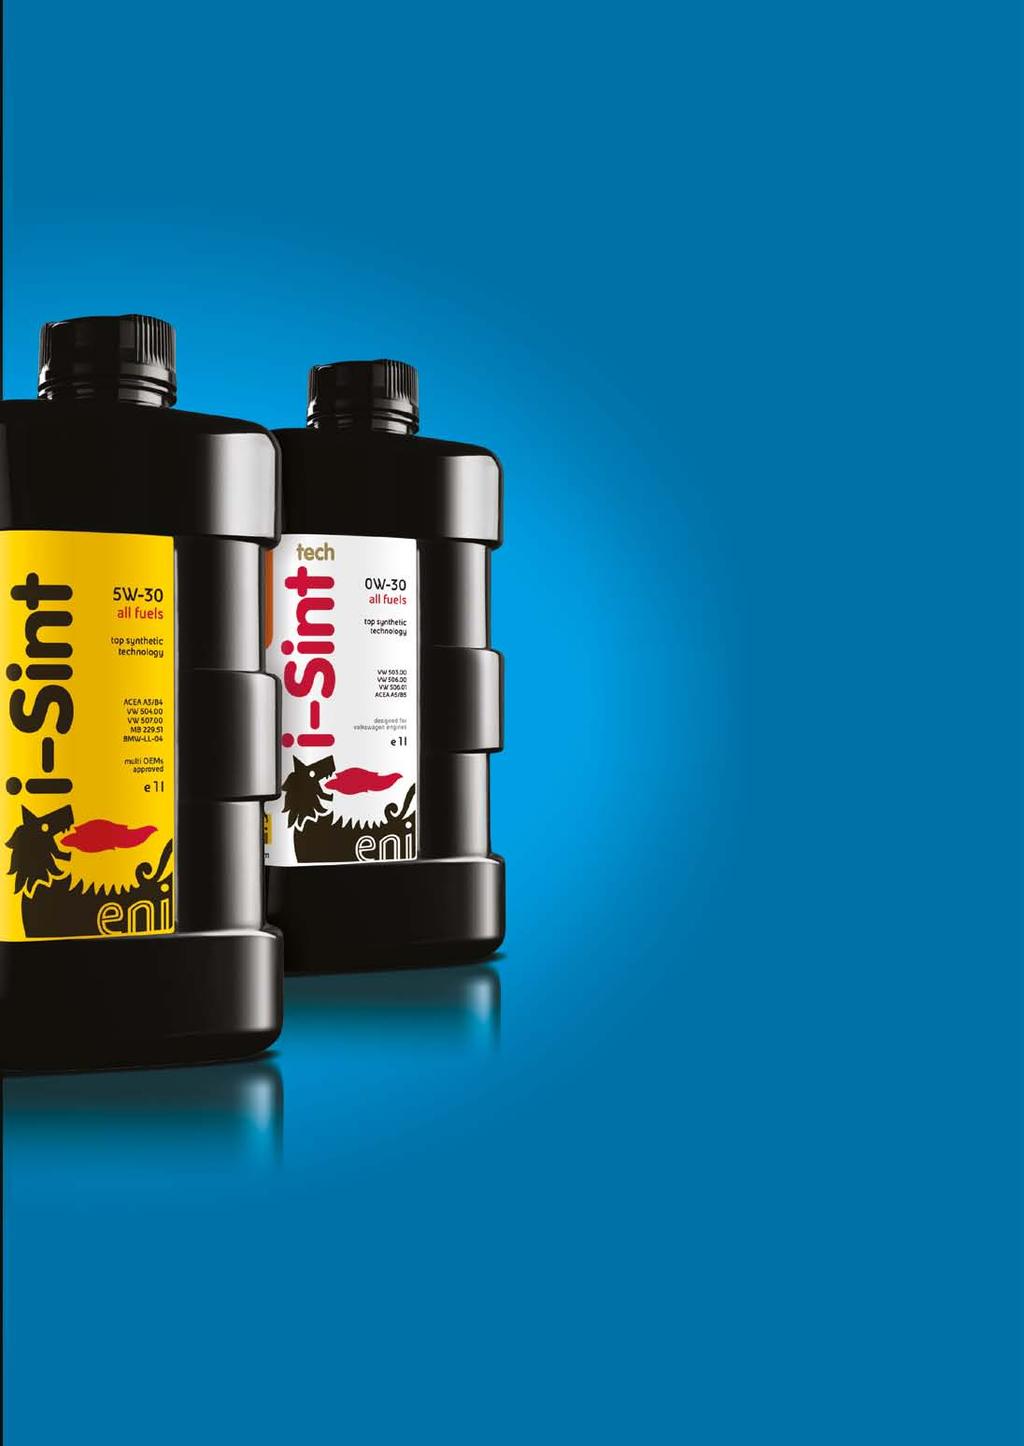 Through higher durability and fluidity, eni i-sint high-technology lubricants represent a whole new way of thinking about driving.